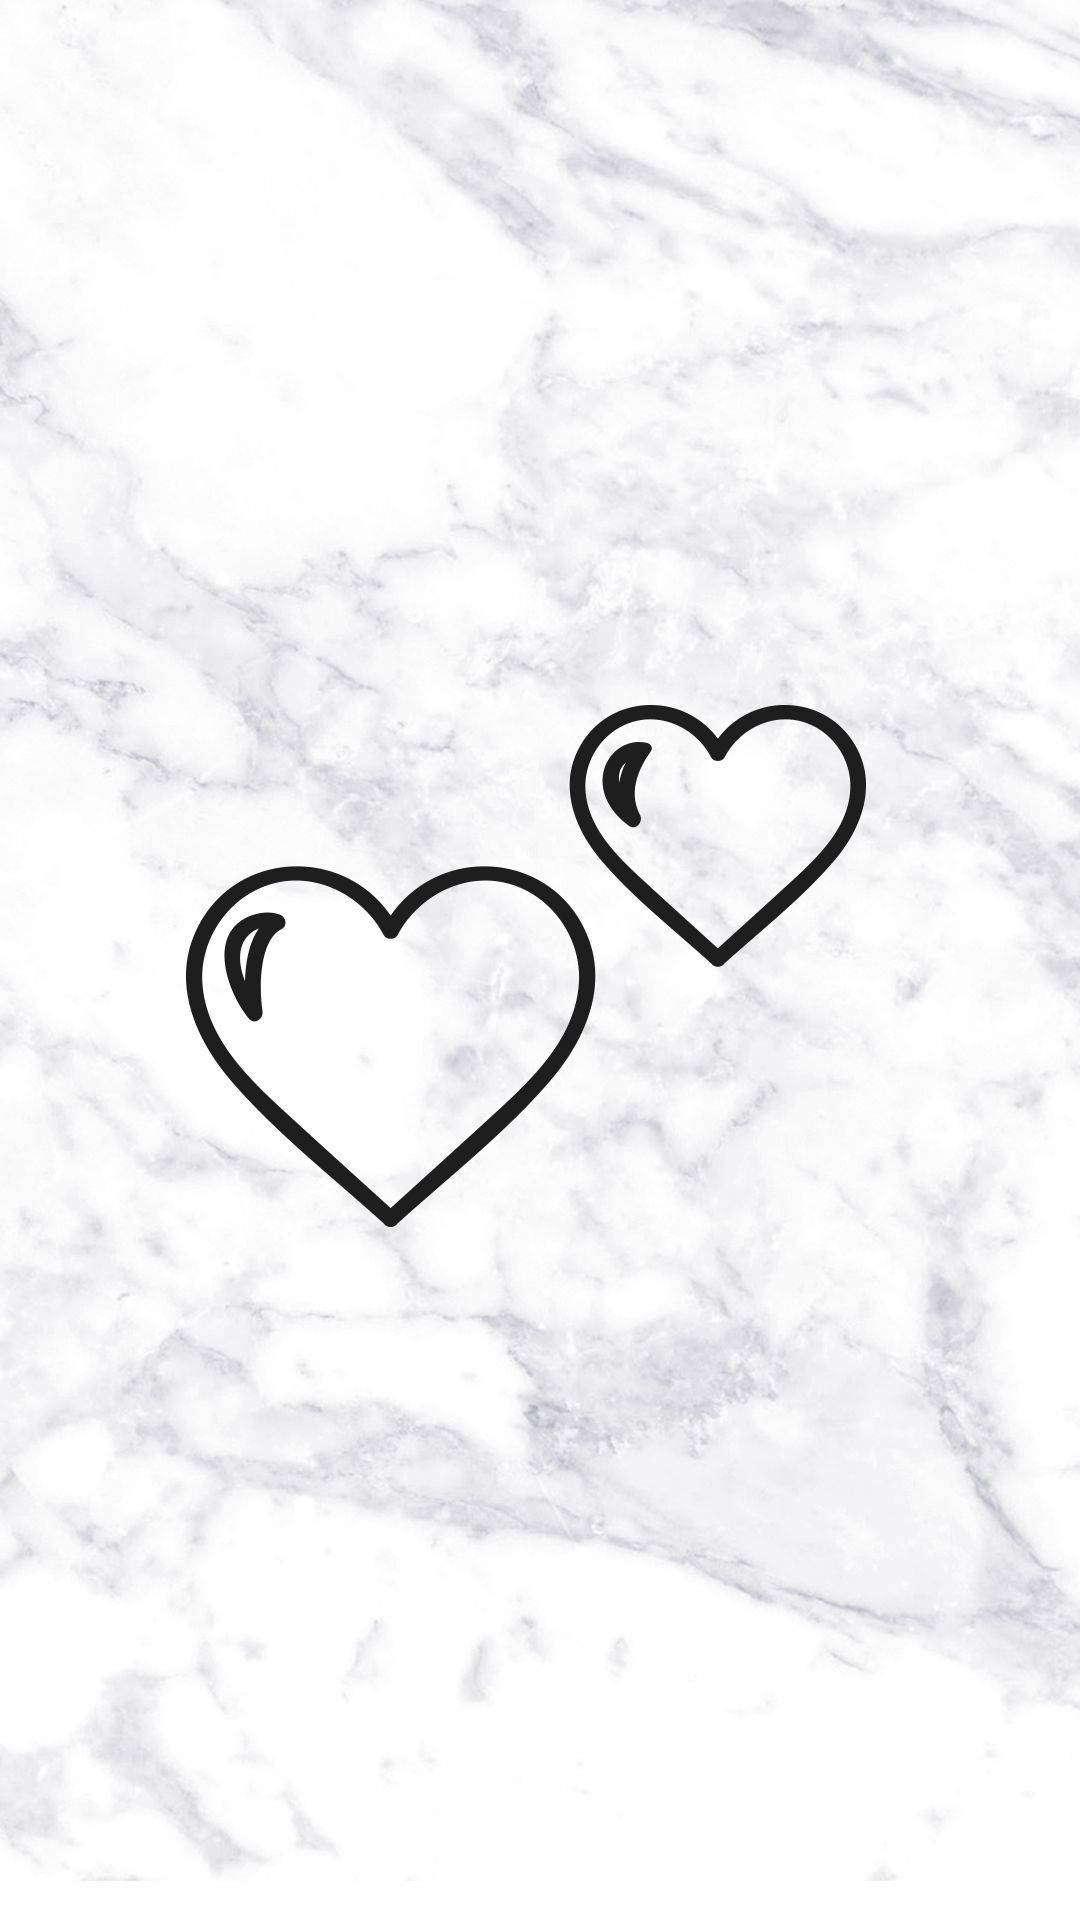 Two Hearts Black White Marble Iphone